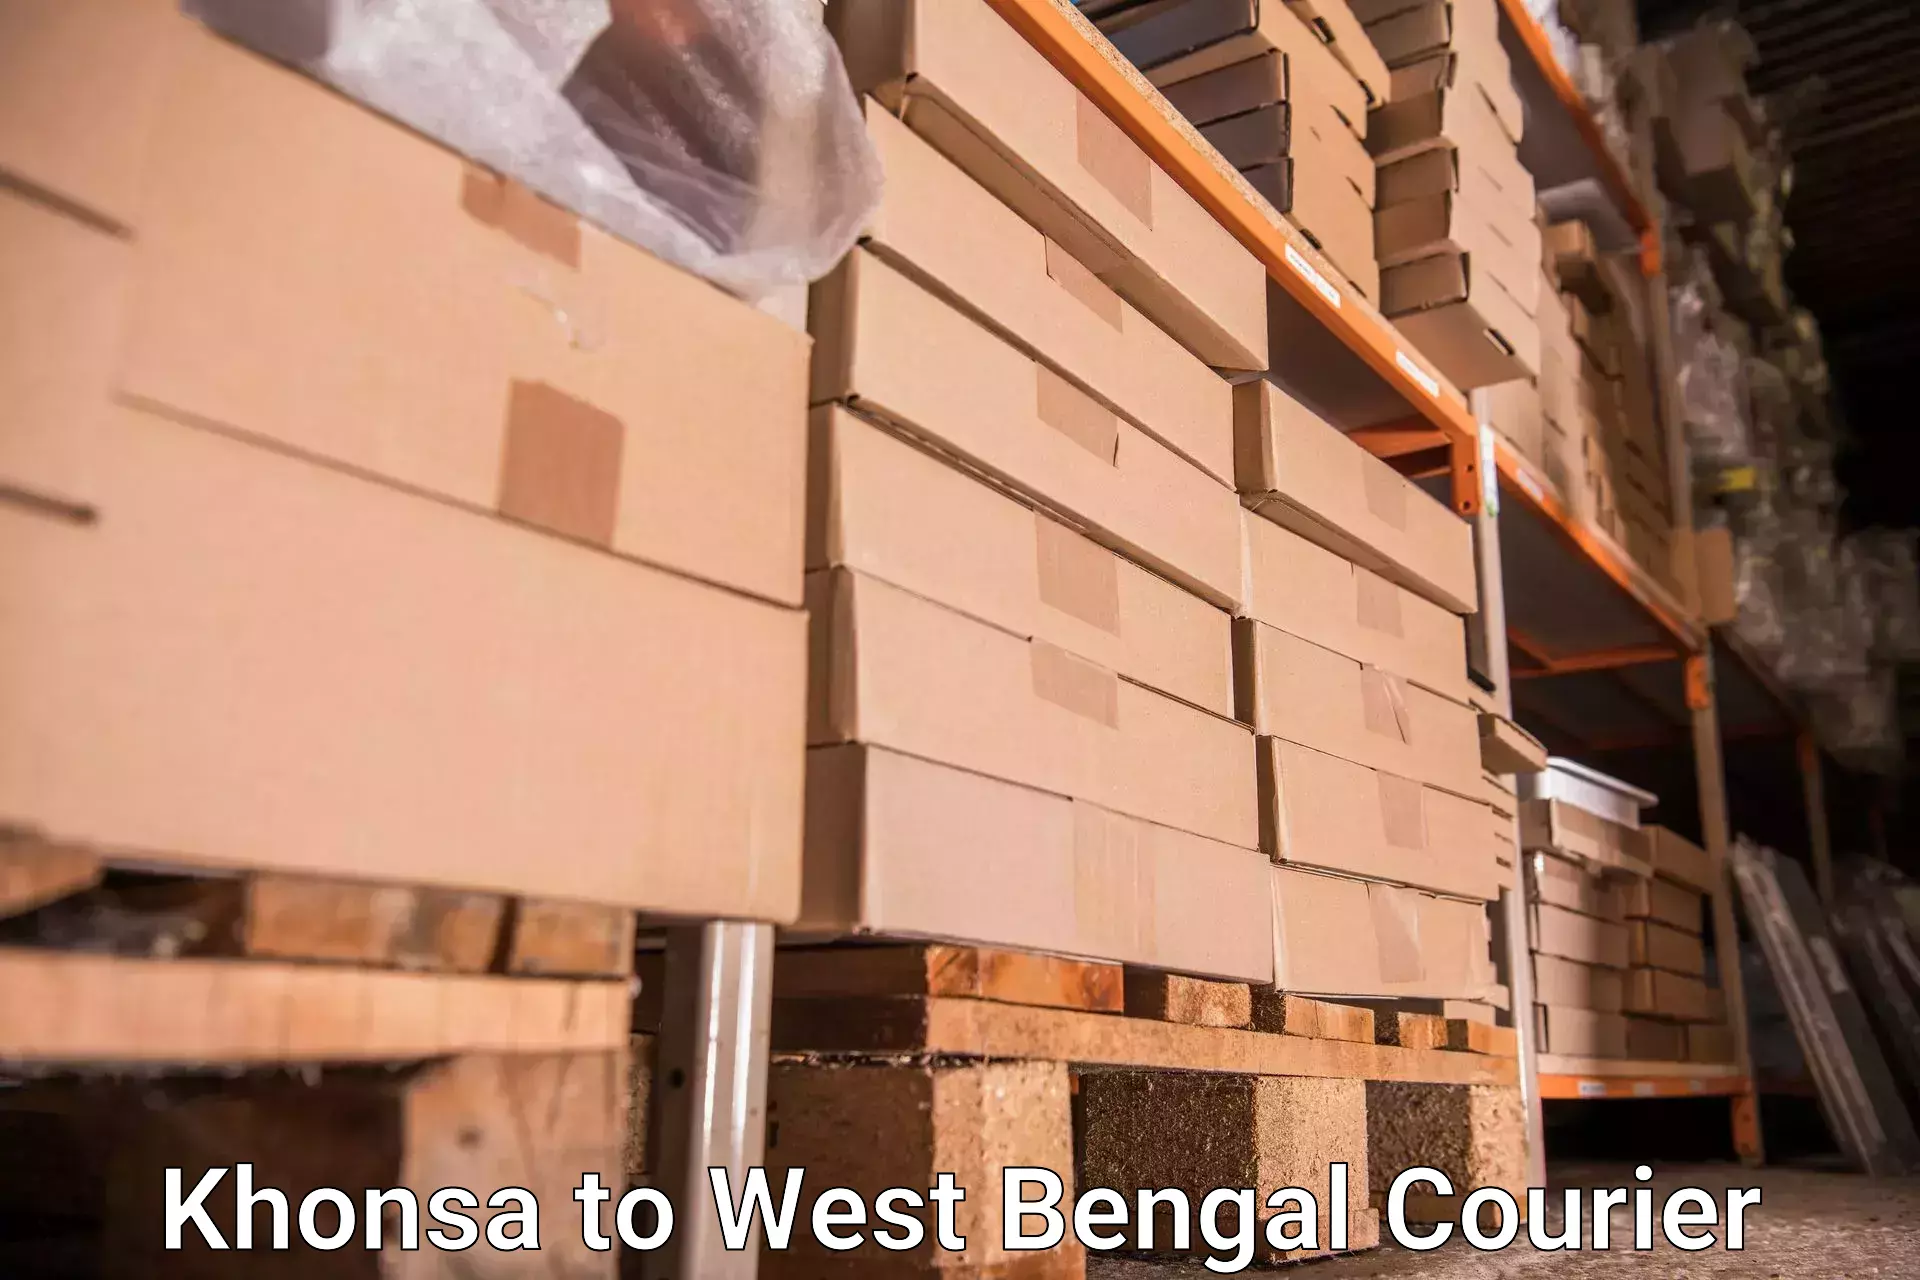 Personal effects shipping in Khonsa to Kalna